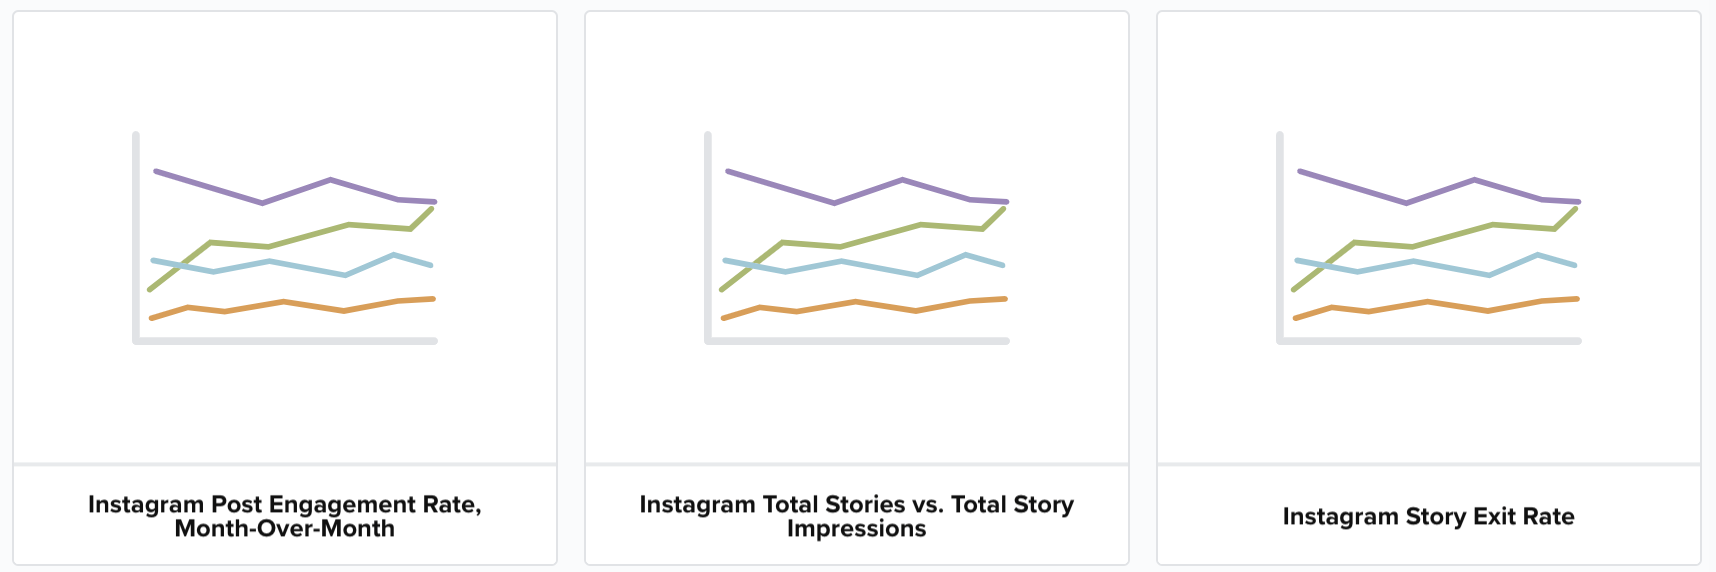 instagram performance graph example